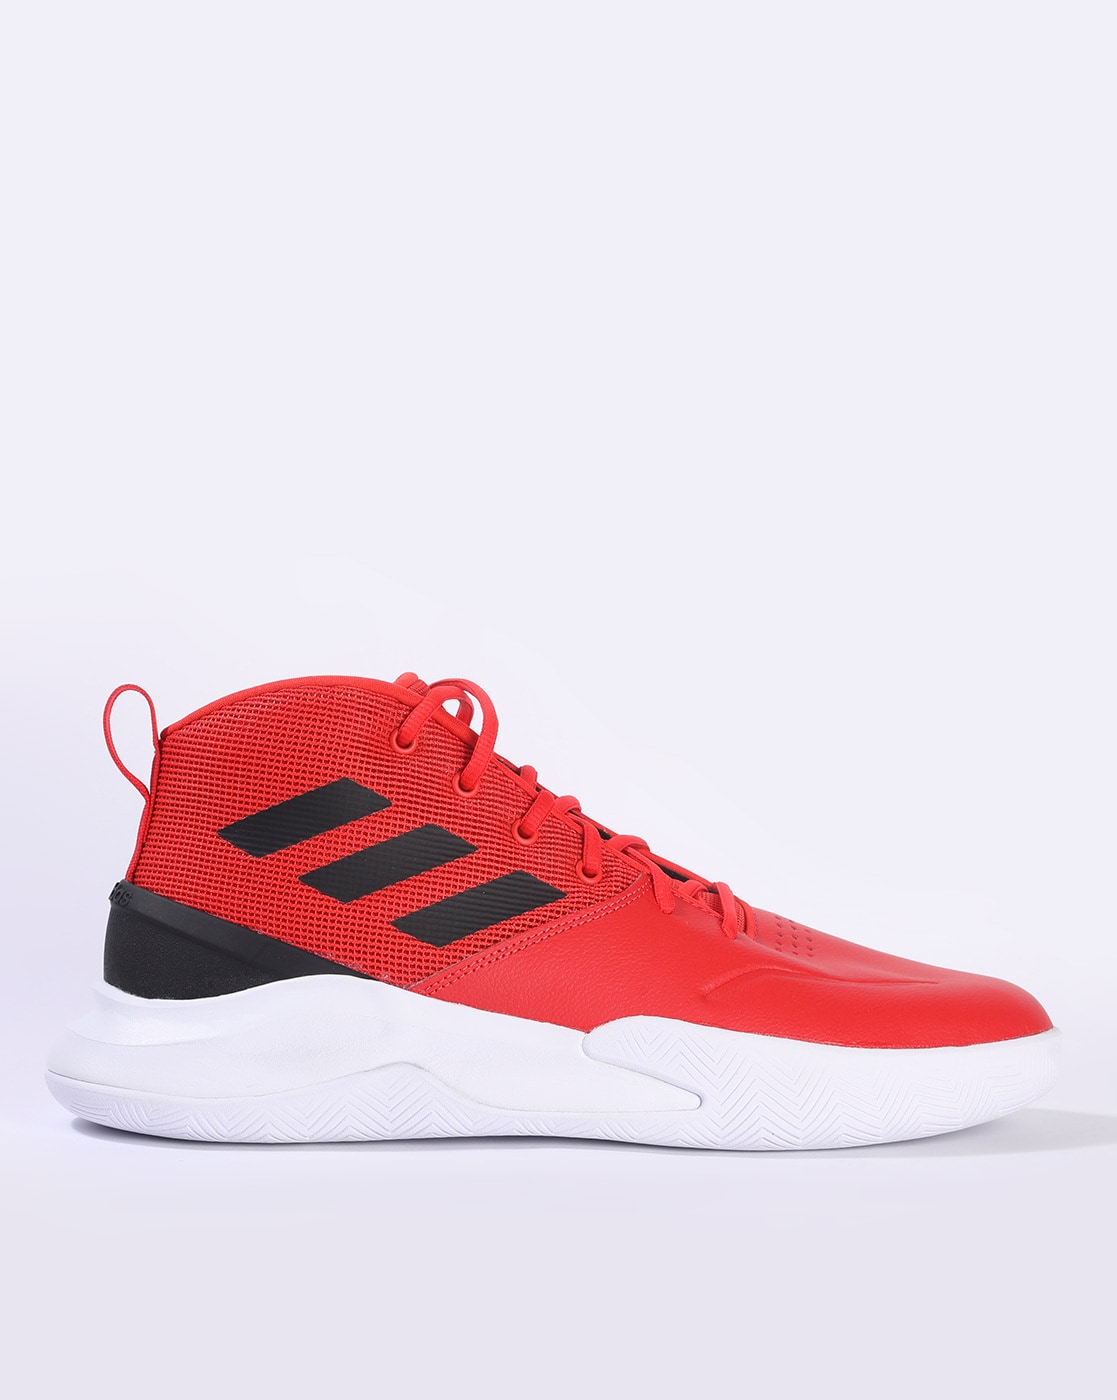 adidas basketball shoes own the game